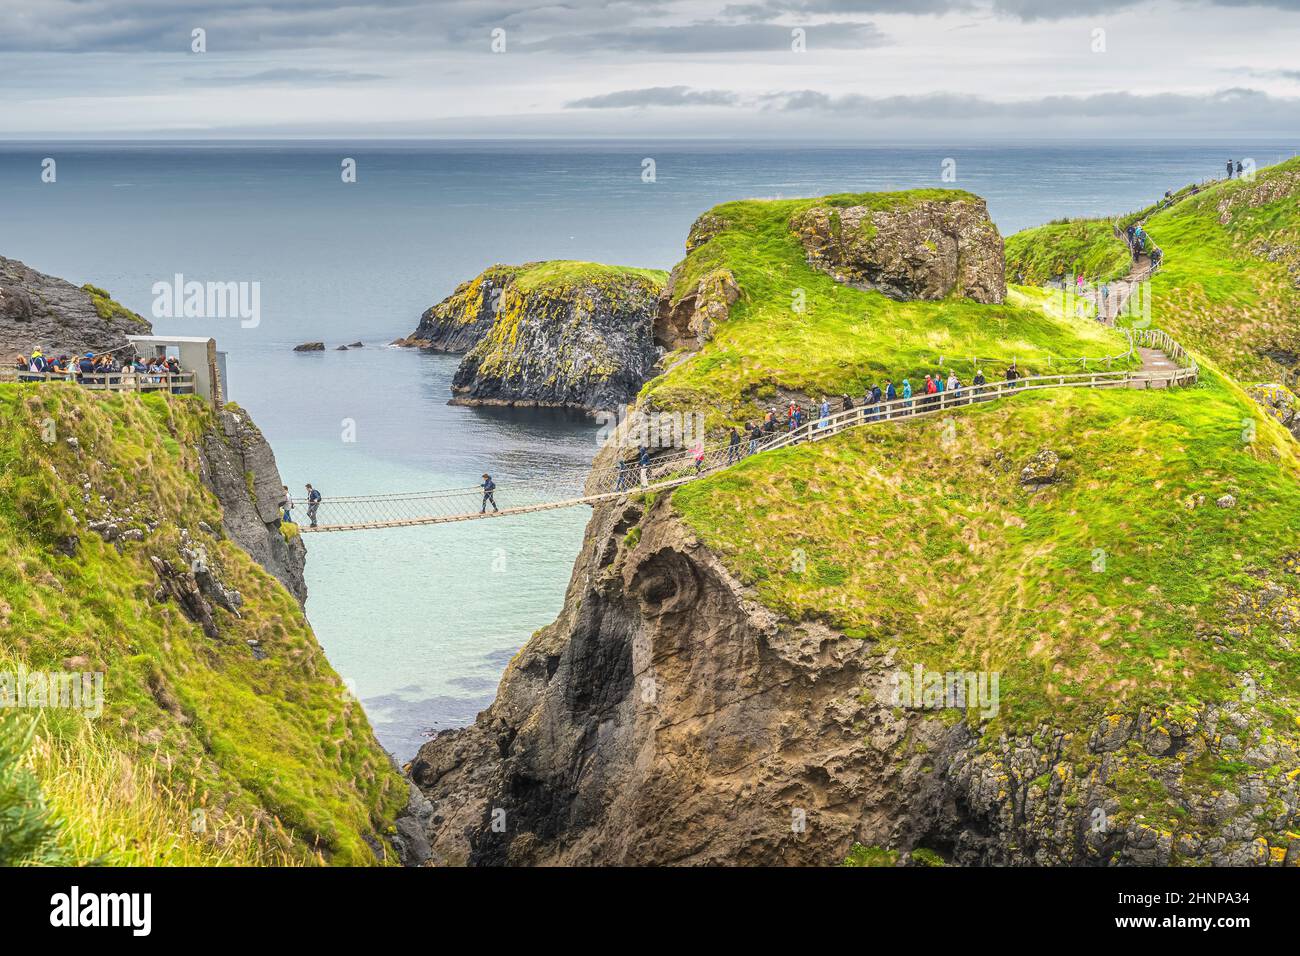 People queueing to crossing Carrick a Rede rope bridge to access island, Northern Ireland Stock Photo